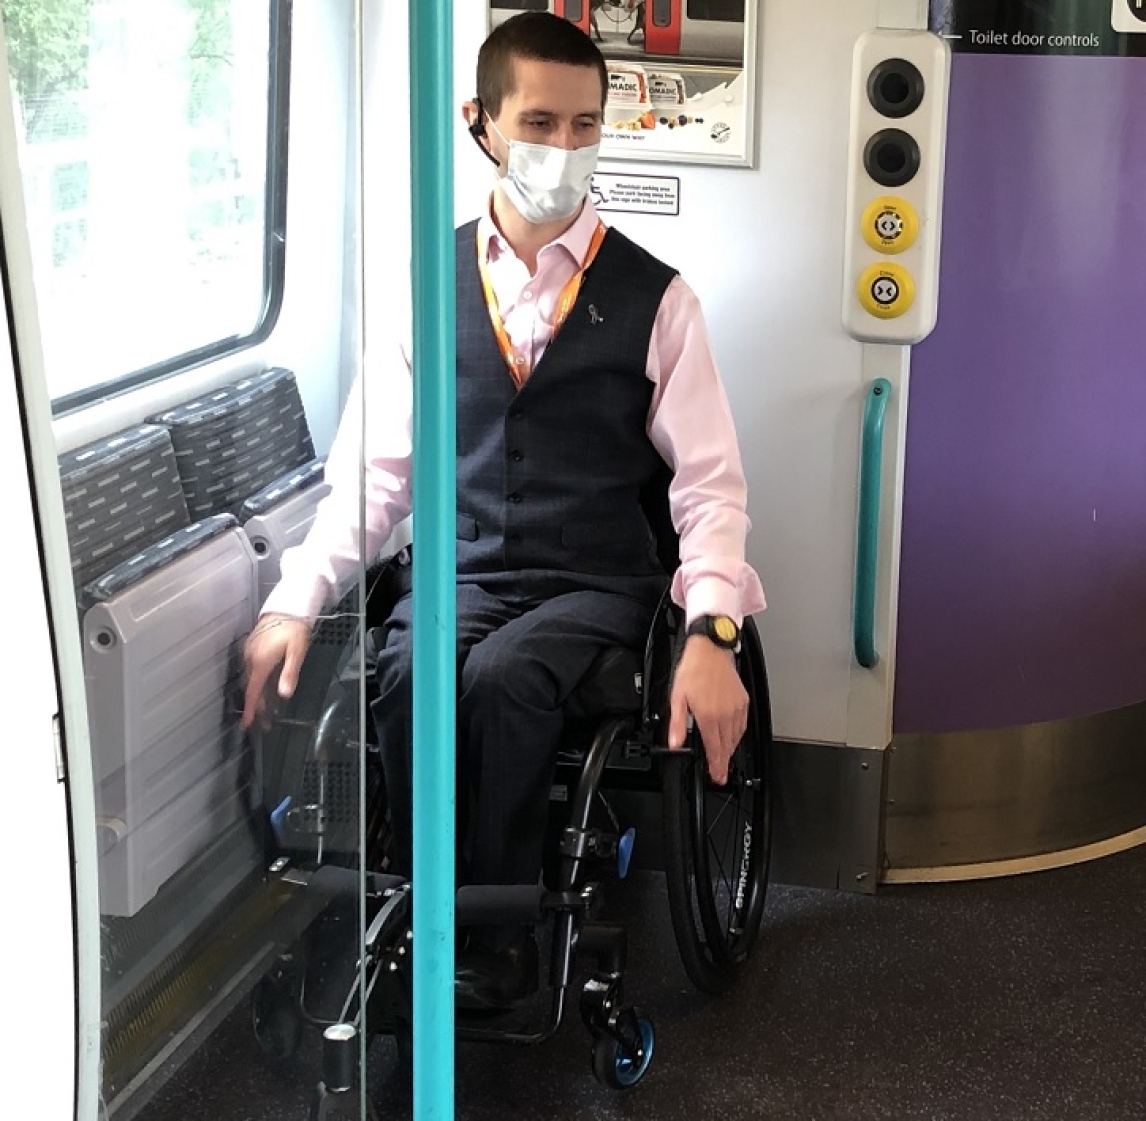 Train passenger in a wheelchair in a wheelchair space on a train, wearing a face covering.